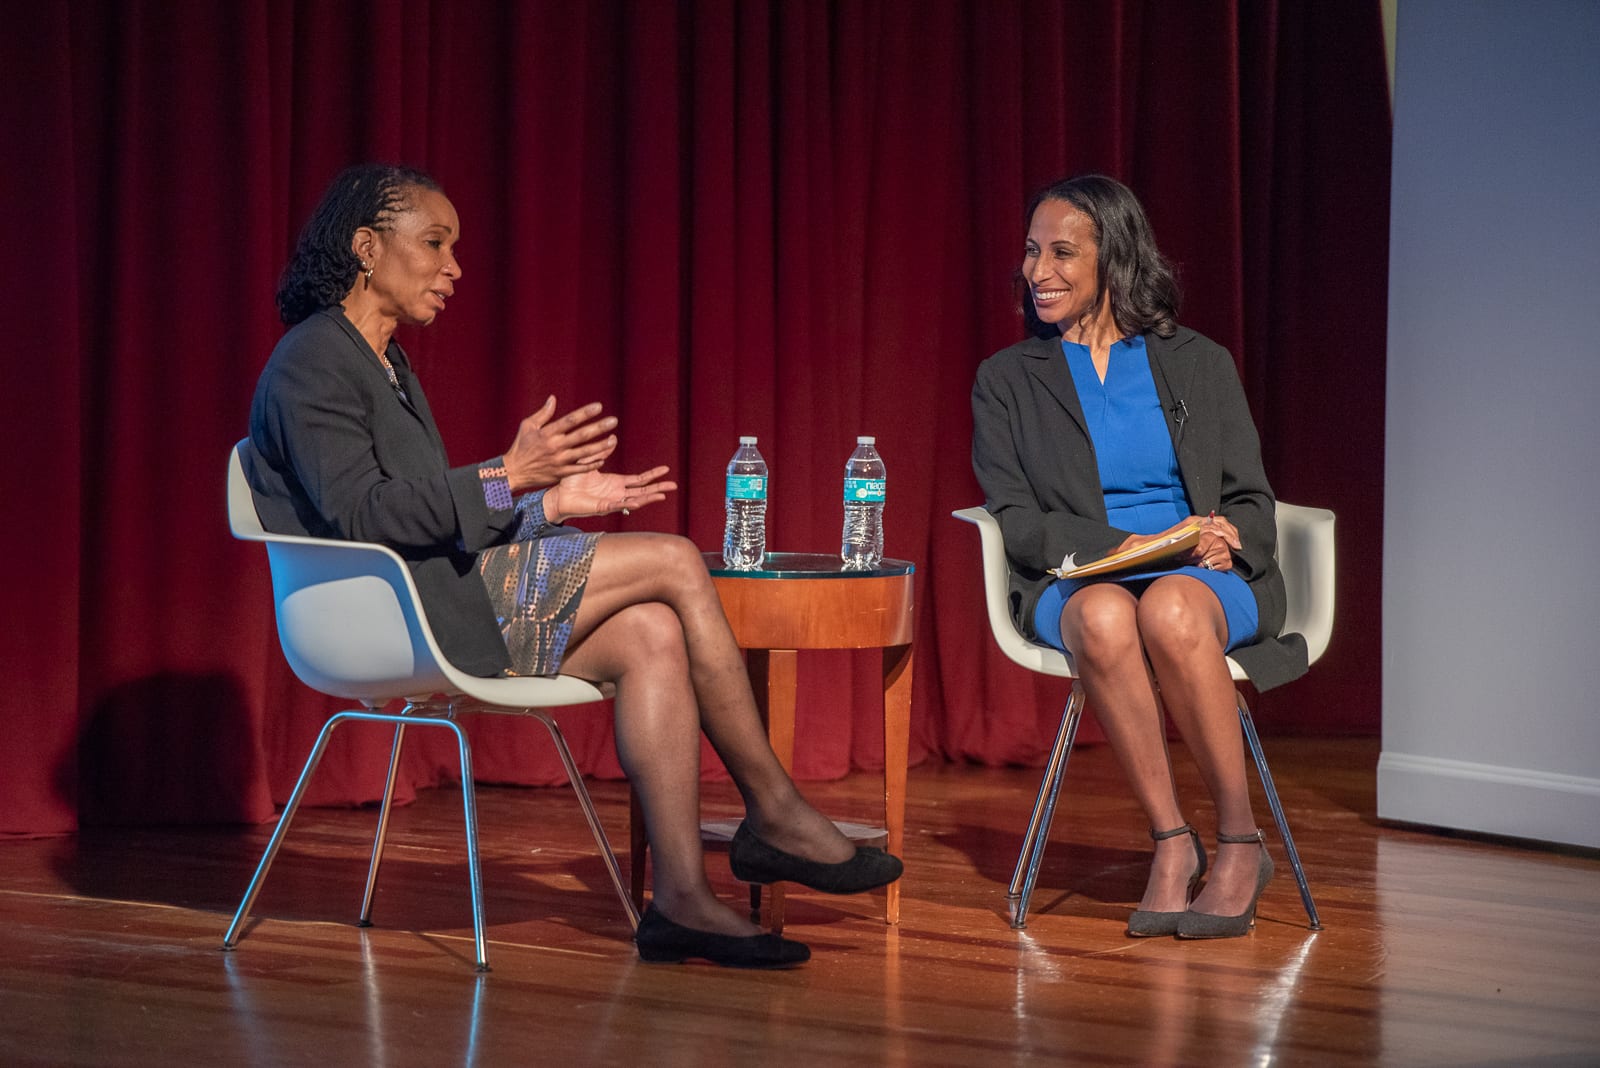 Dr. Helene Gayle, pictured with Dr. Una Osili, kicked off the Diverse Speaker Series